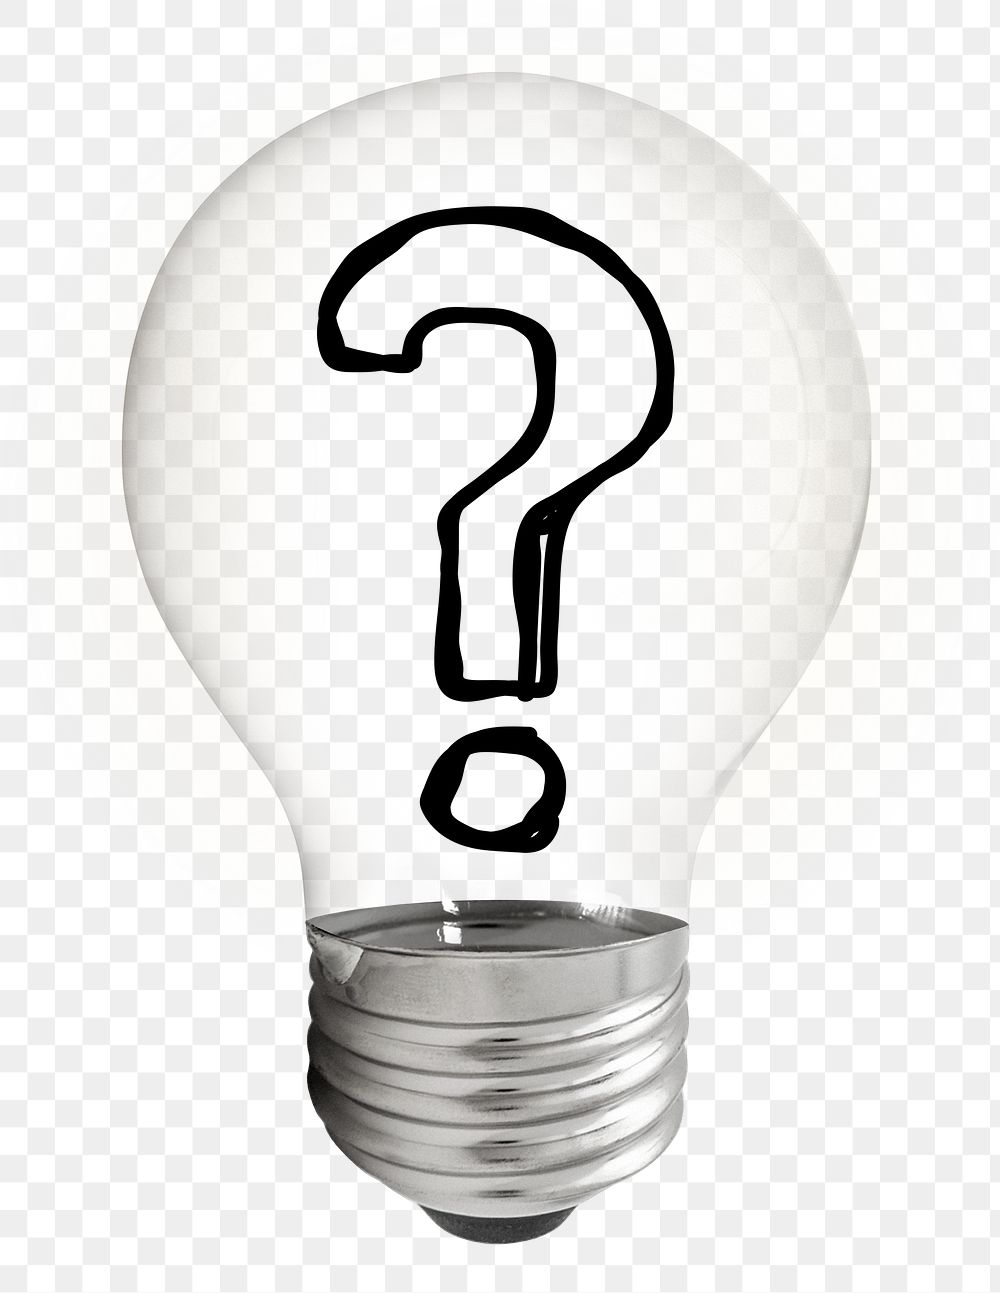 Question mark png icon doodle light bulb sticker, business symbol graphic on transparent background